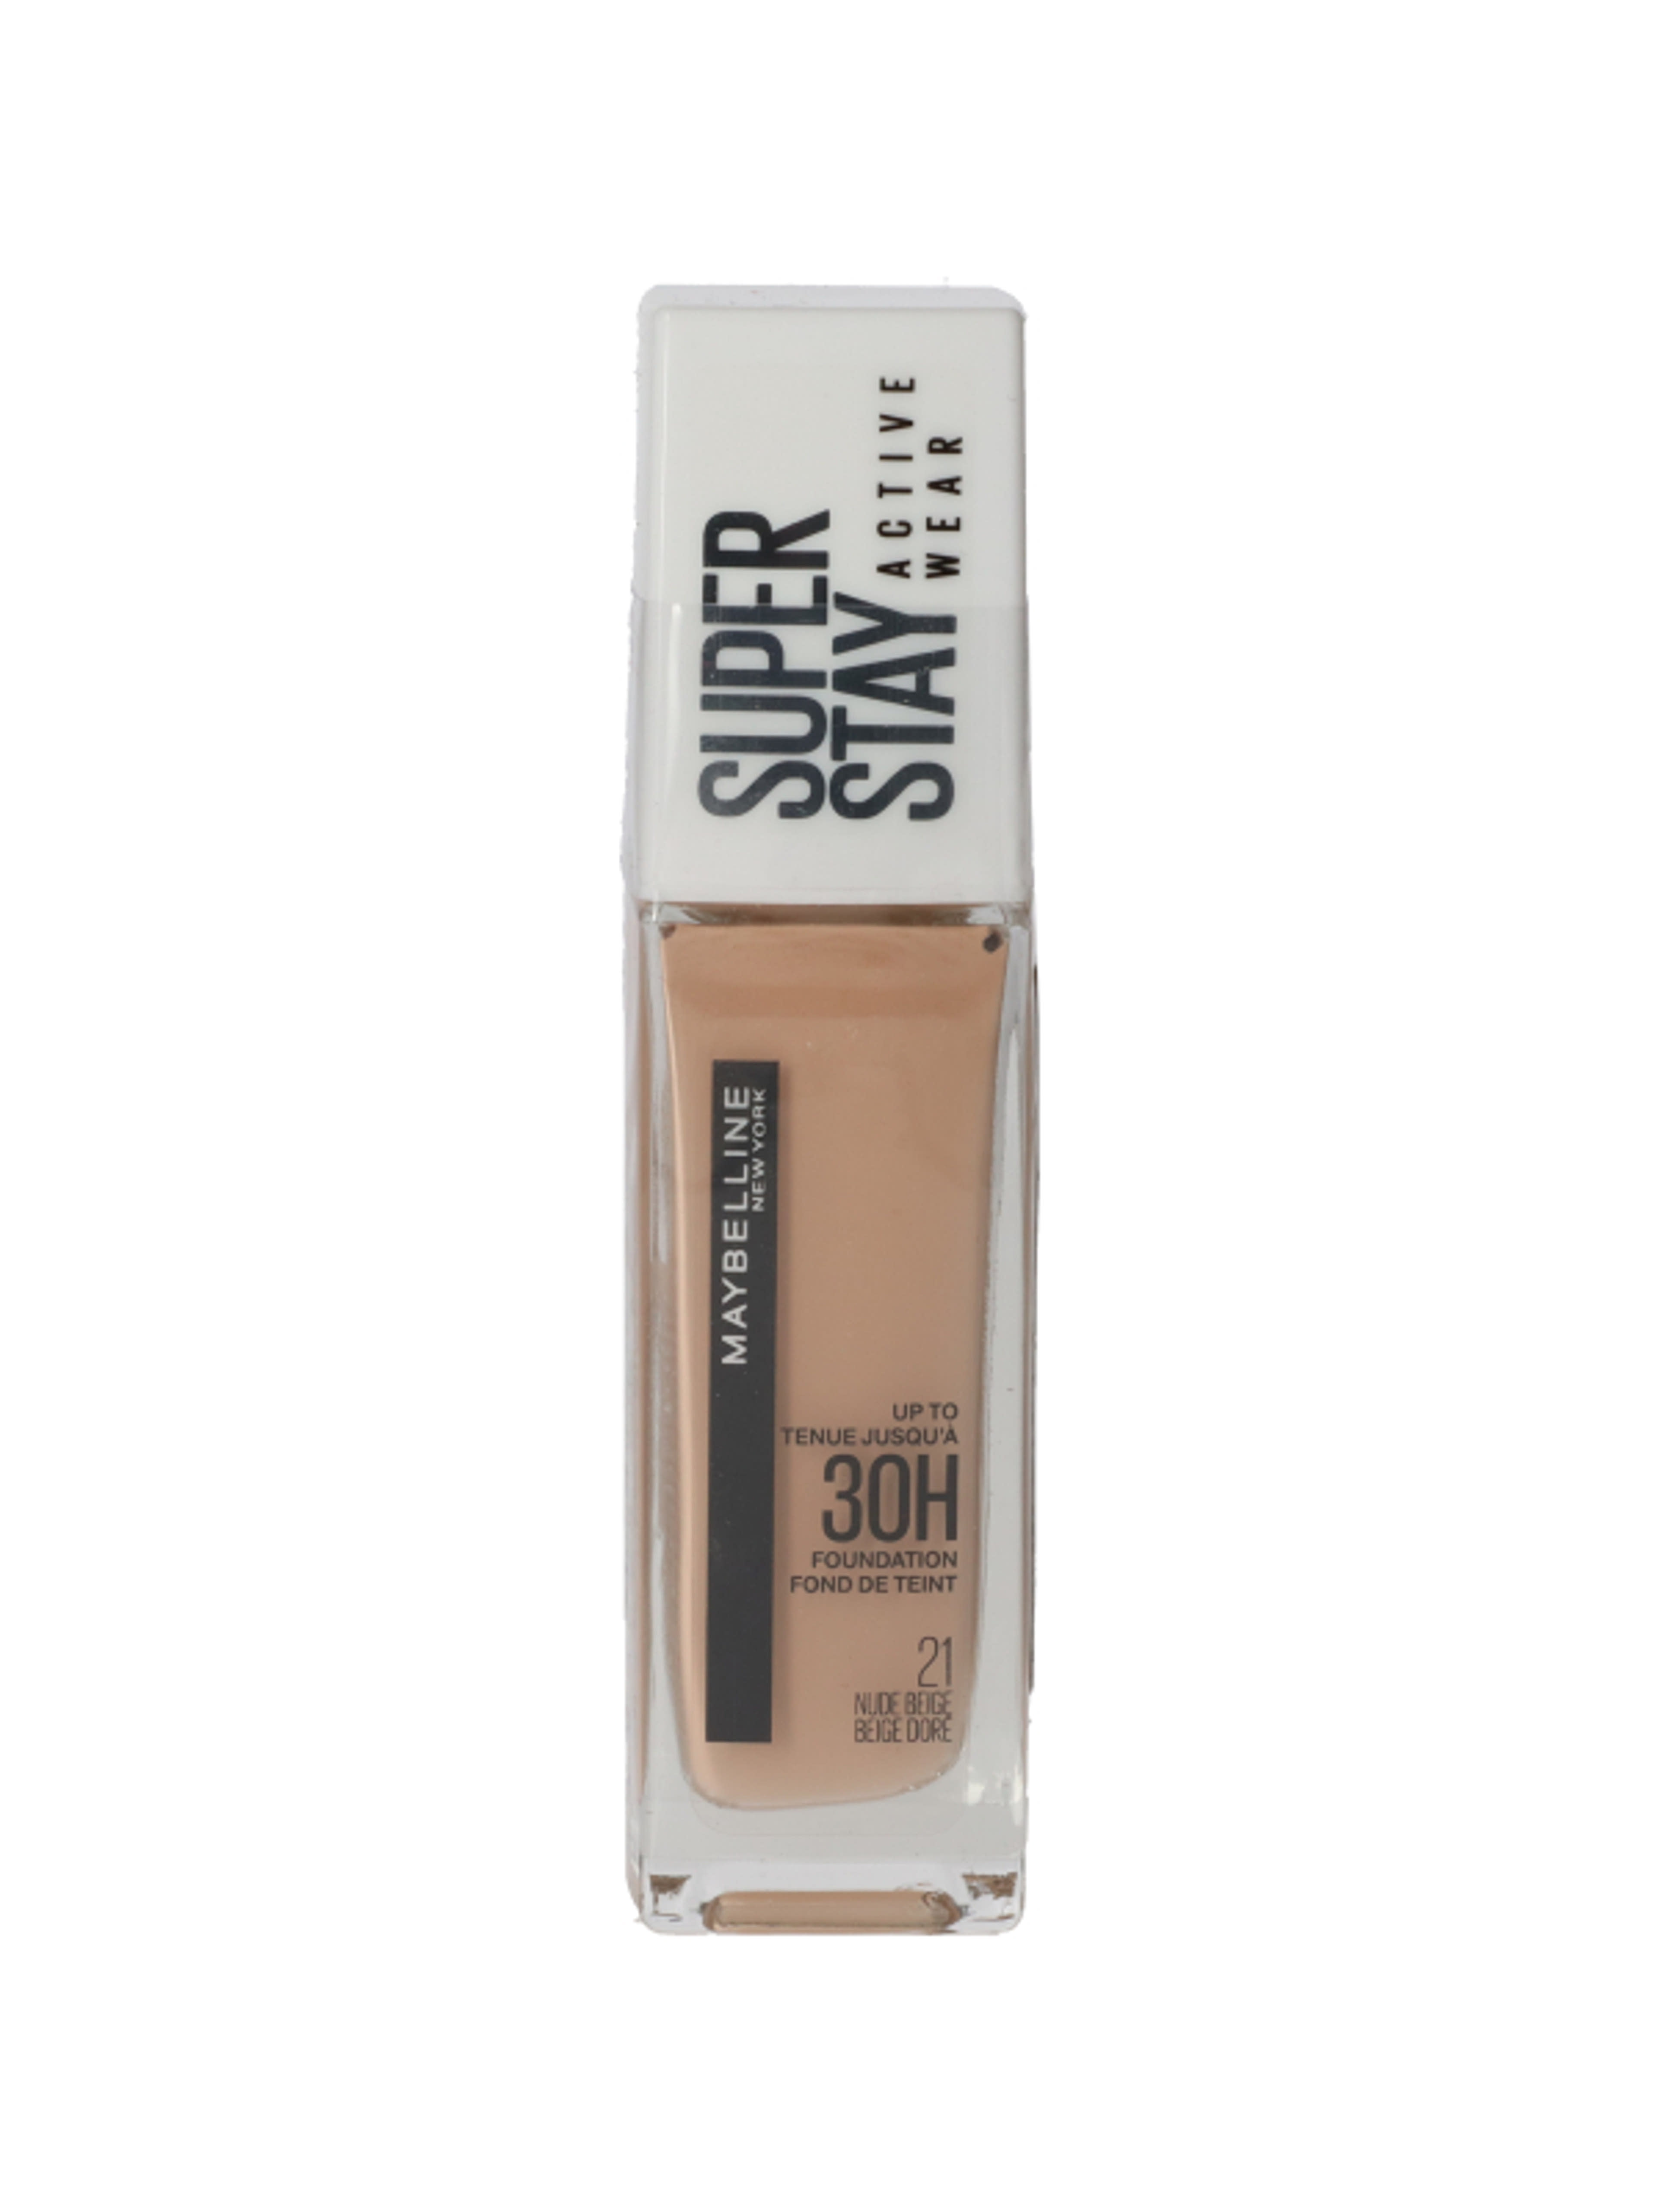 Maybelline SuperStay 30H Alapozó, 21 Nude Beige - 1 db-1